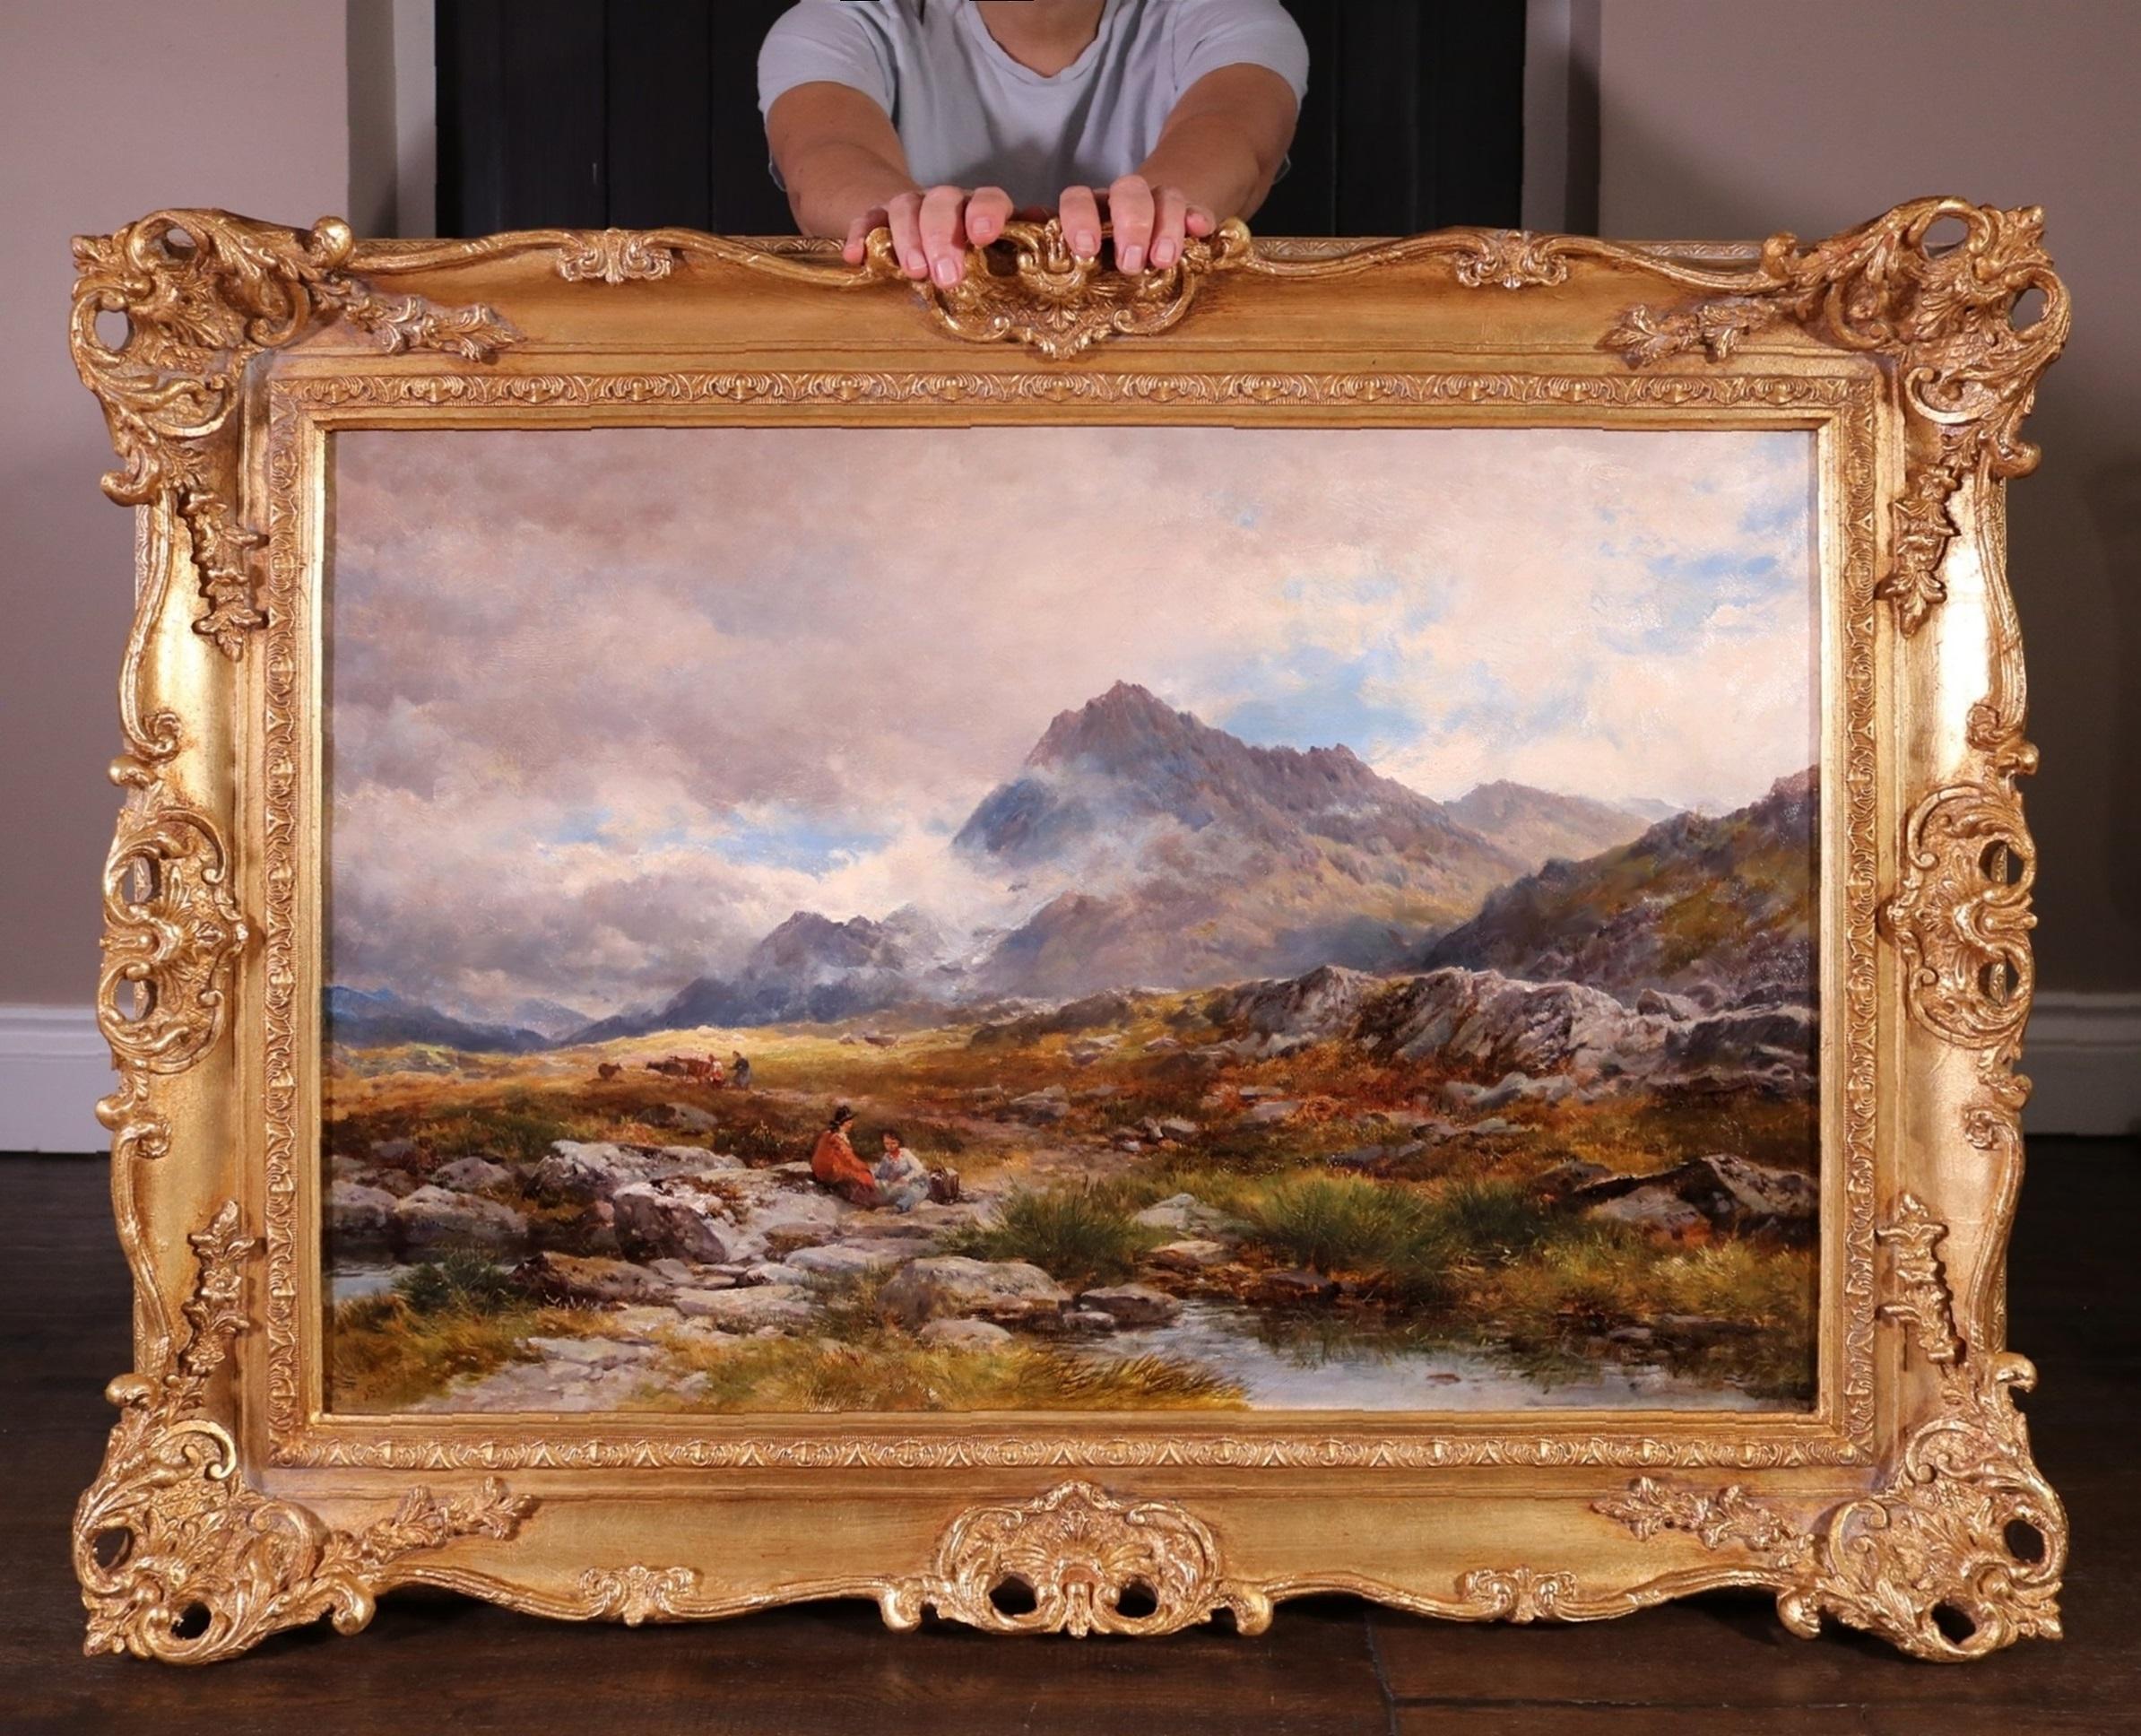 Before Glyder Fawr - Large 19th Century Oil Painting Welsh Mountain Landscape 